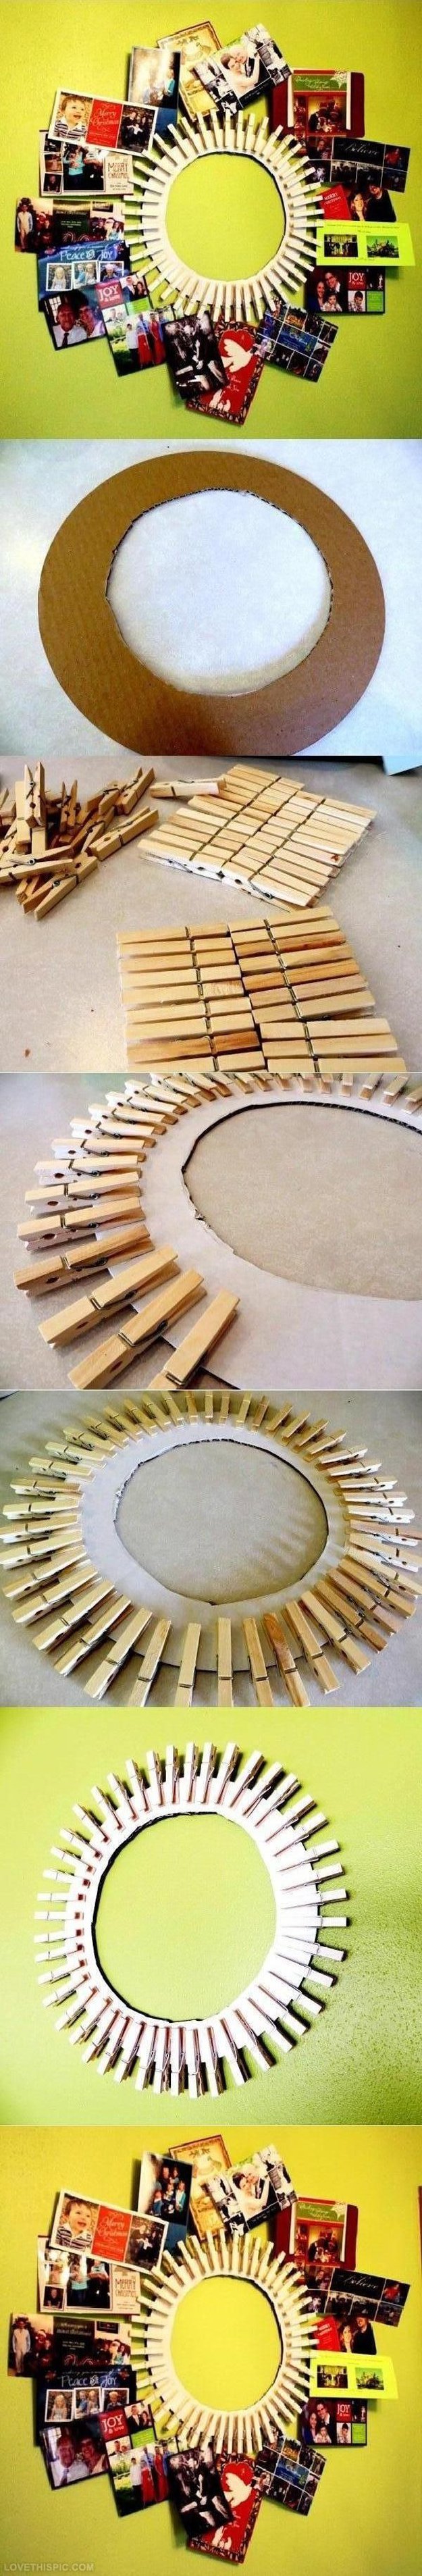 Best DIY Picture Frames and Photo Frame Ideas - DIY Clothespin Frame - How To Make Cool Handmade Projects from Wood, Canvas, Instagram Photos. Creative Birthday Gifts, Fun Crafts for Friends and Wall Art Tutorials #diyideas #diygifts #teencrafts